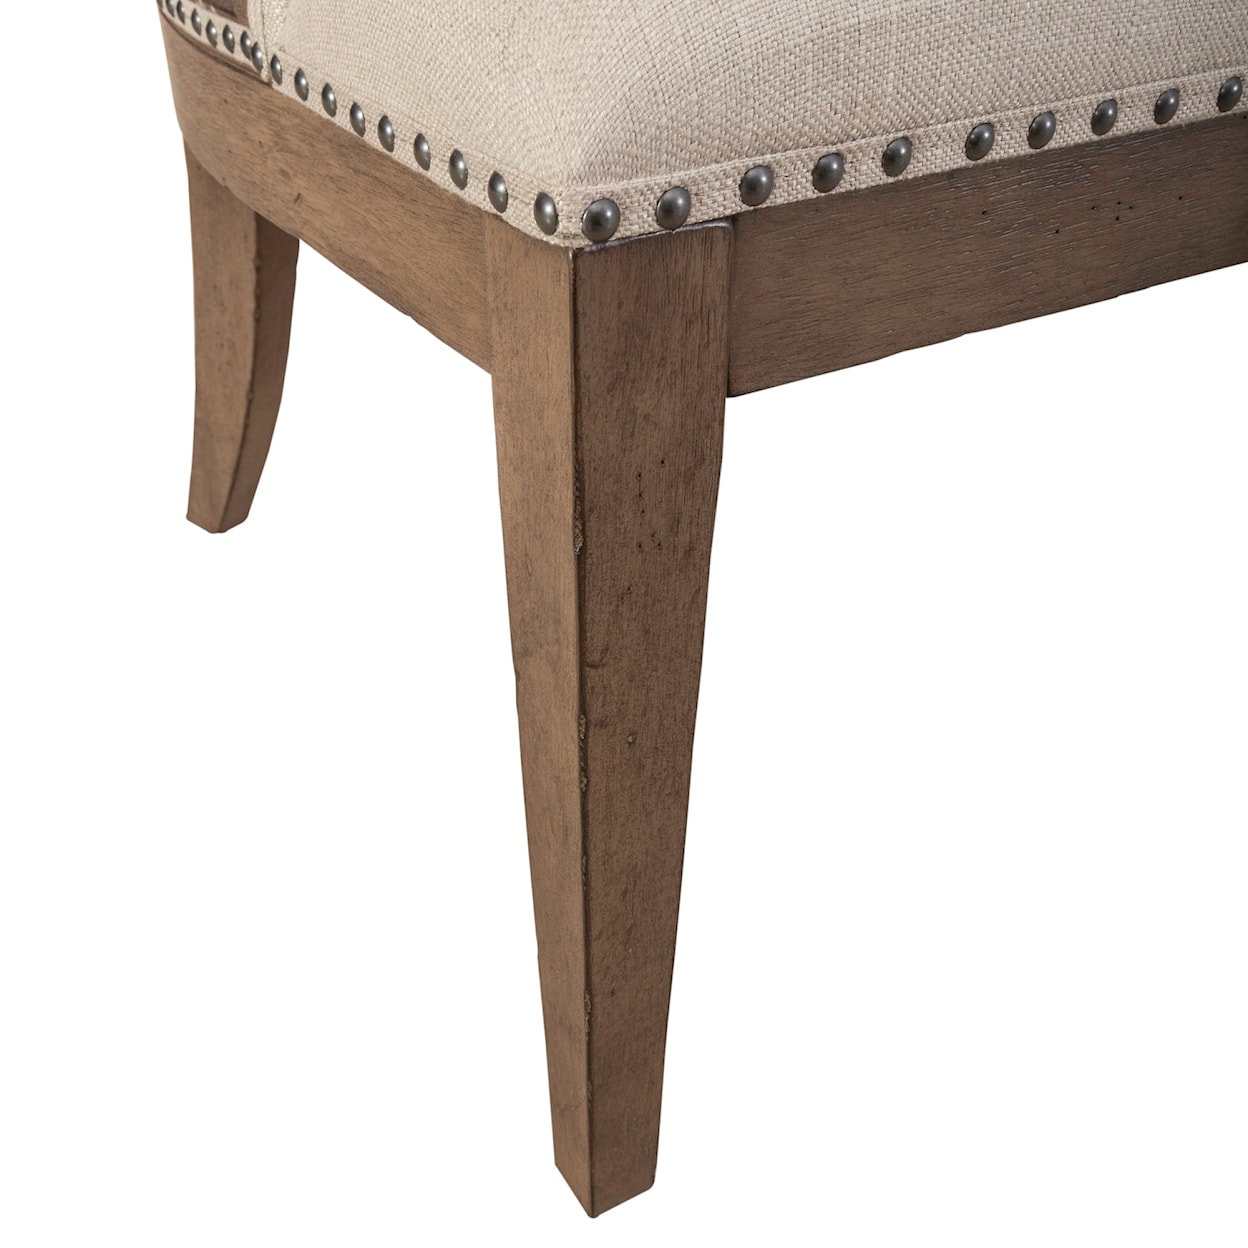 Libby Americana Farmhouse Upholstered Sheltered Side Chair